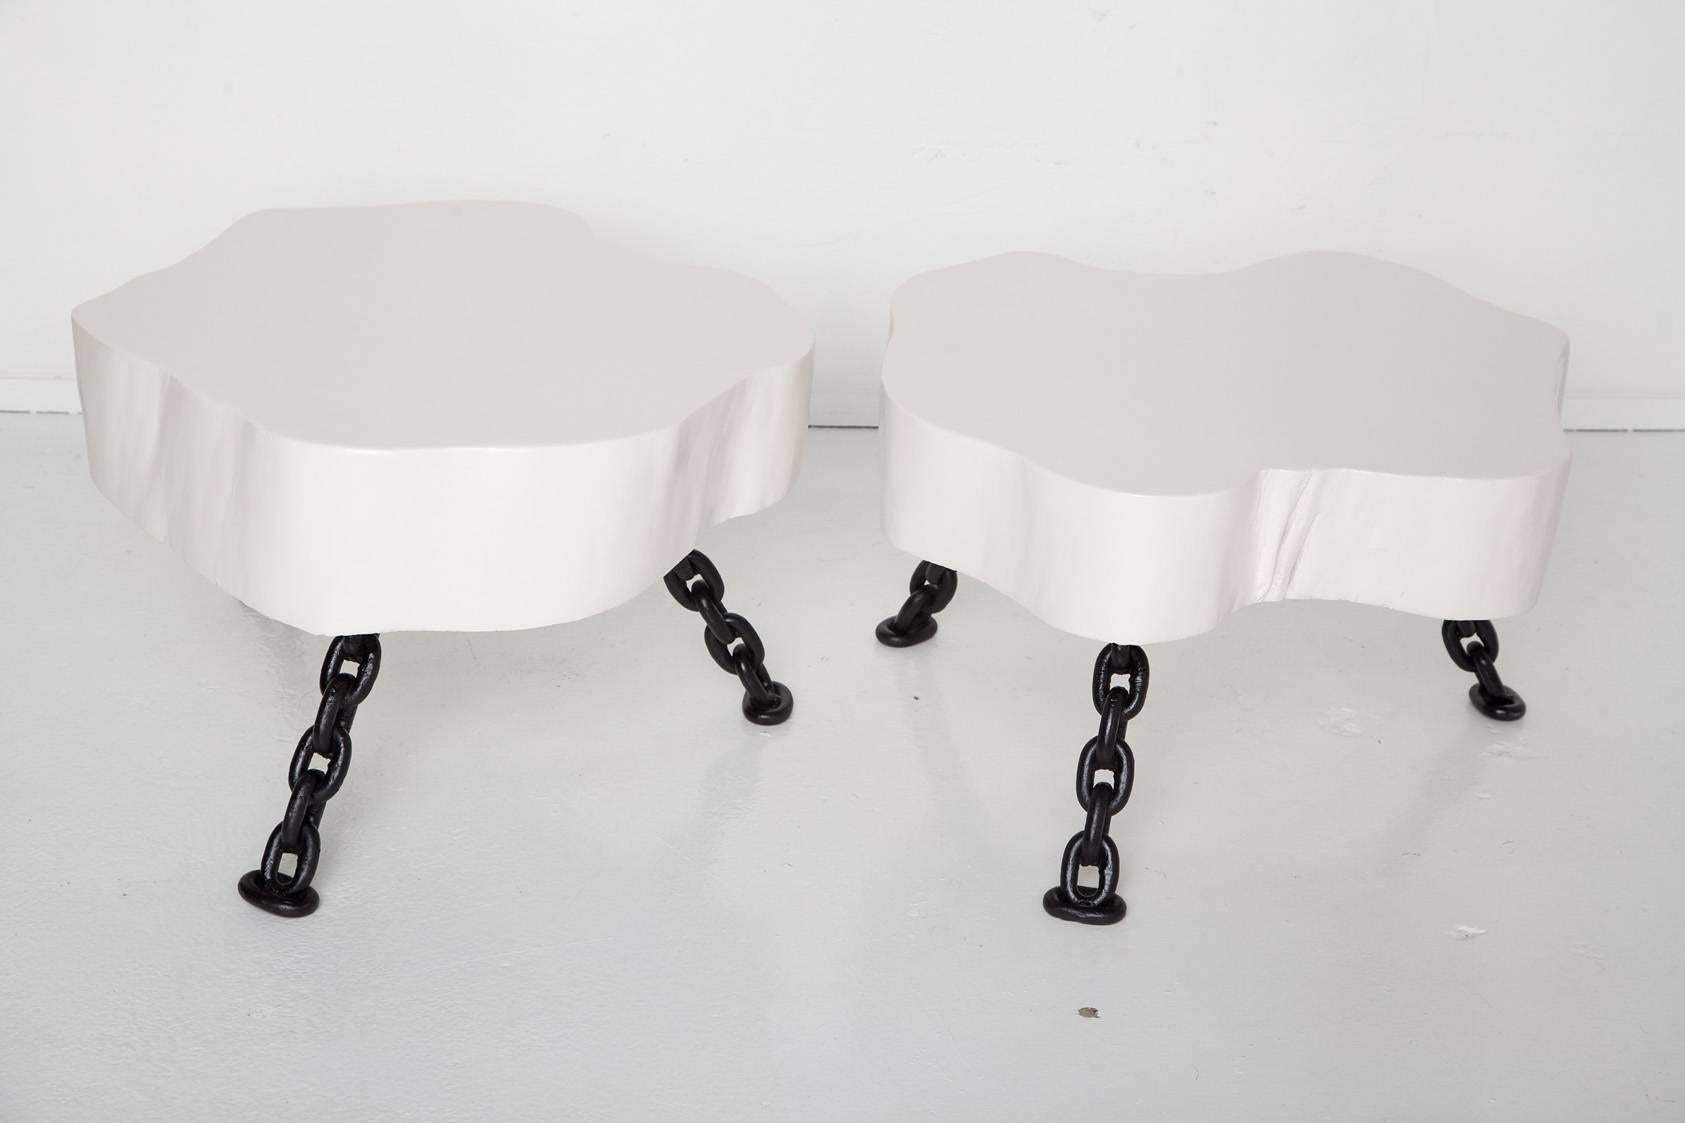 American Pair of White Lacquered Tree Trunk Tables with Nautical Chain Legs, Circa 1960